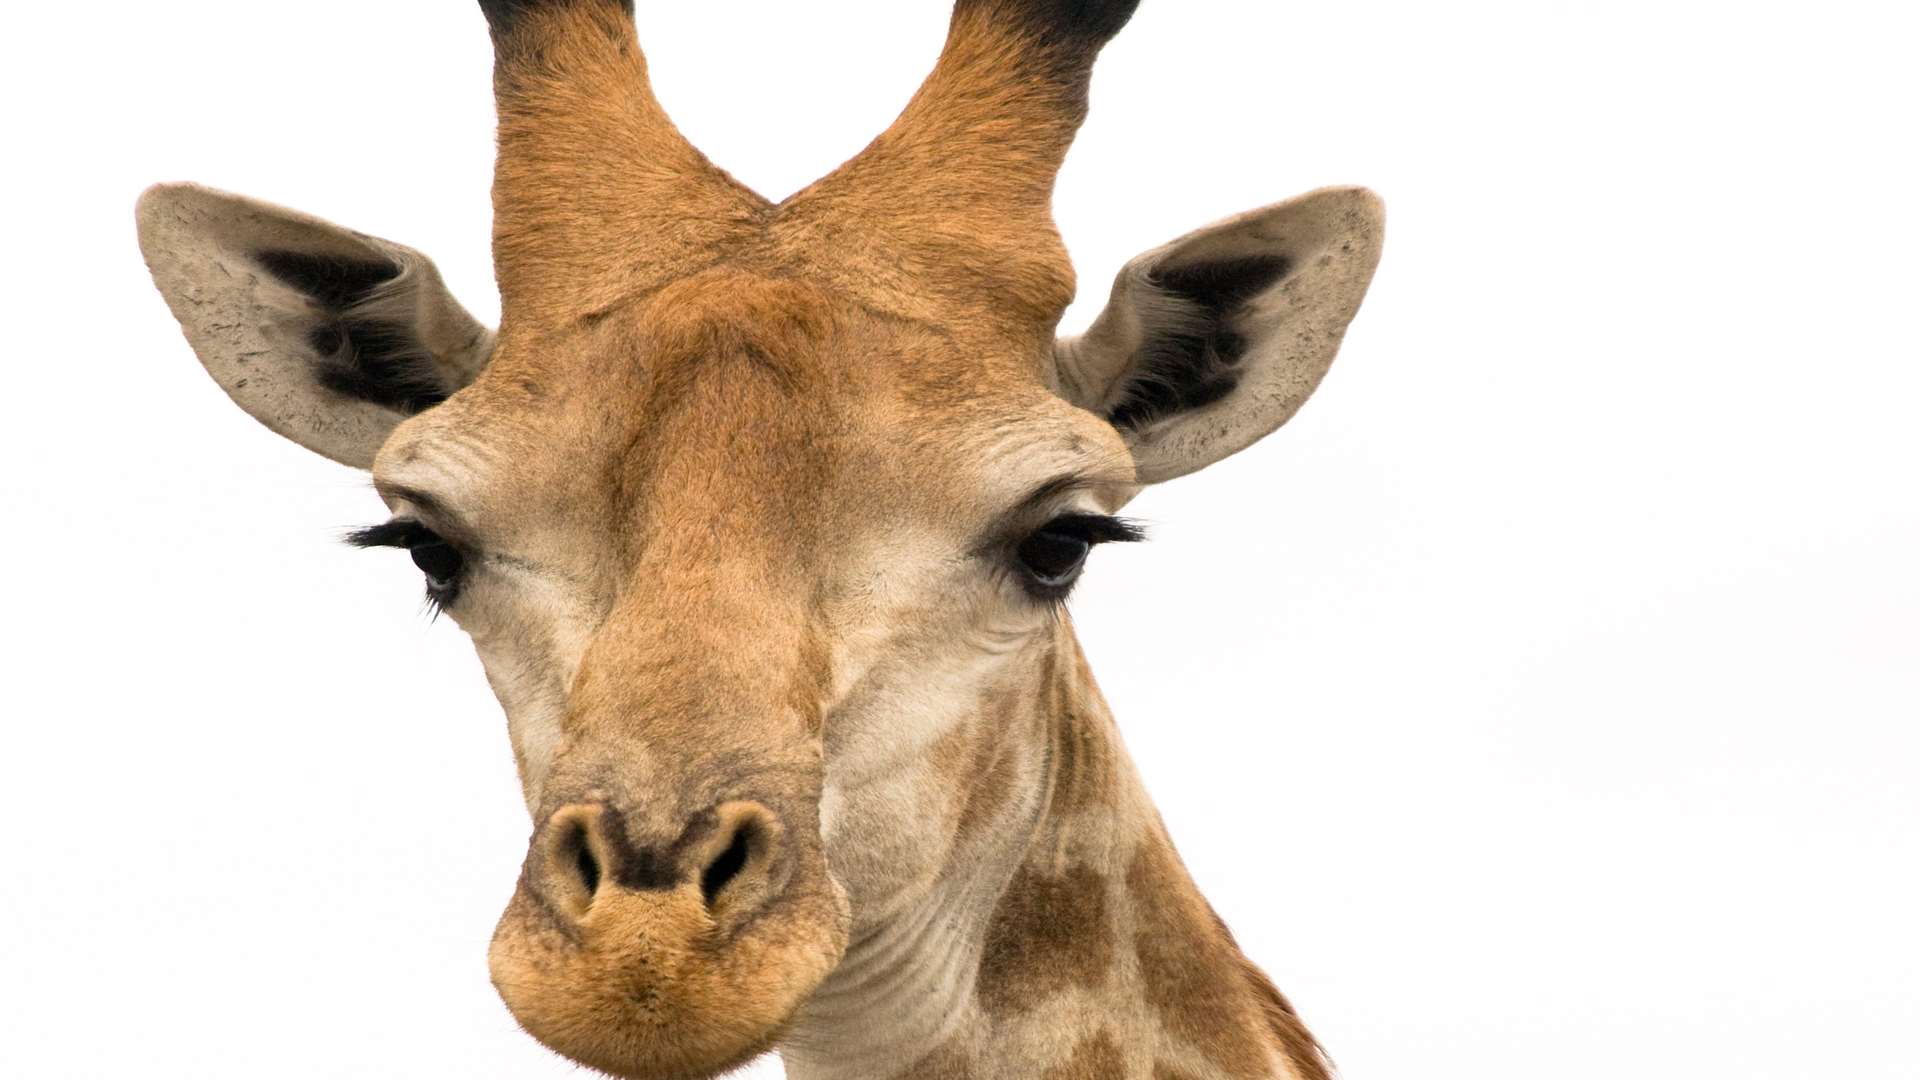 Meet some giraffes and join in with the activities at Port Lympne Reserve